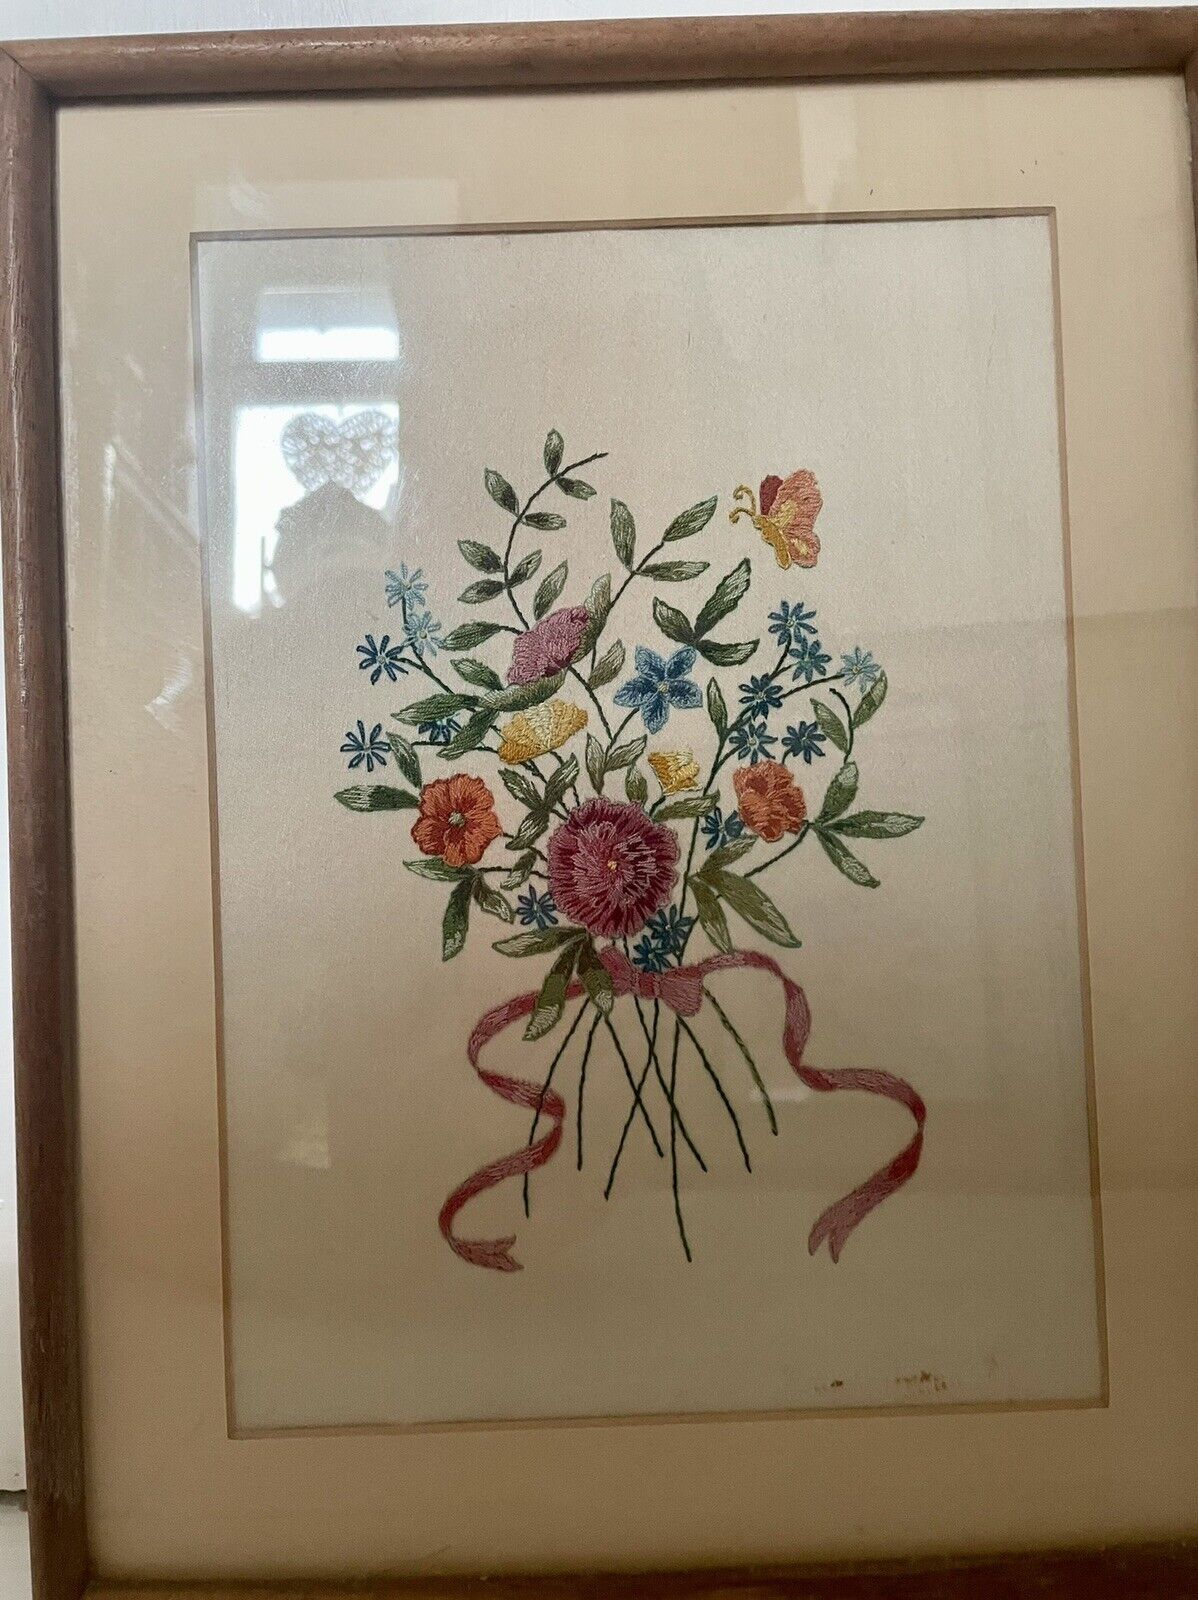 vintage hand embroidered pretty posy Picture 14x12 Inch